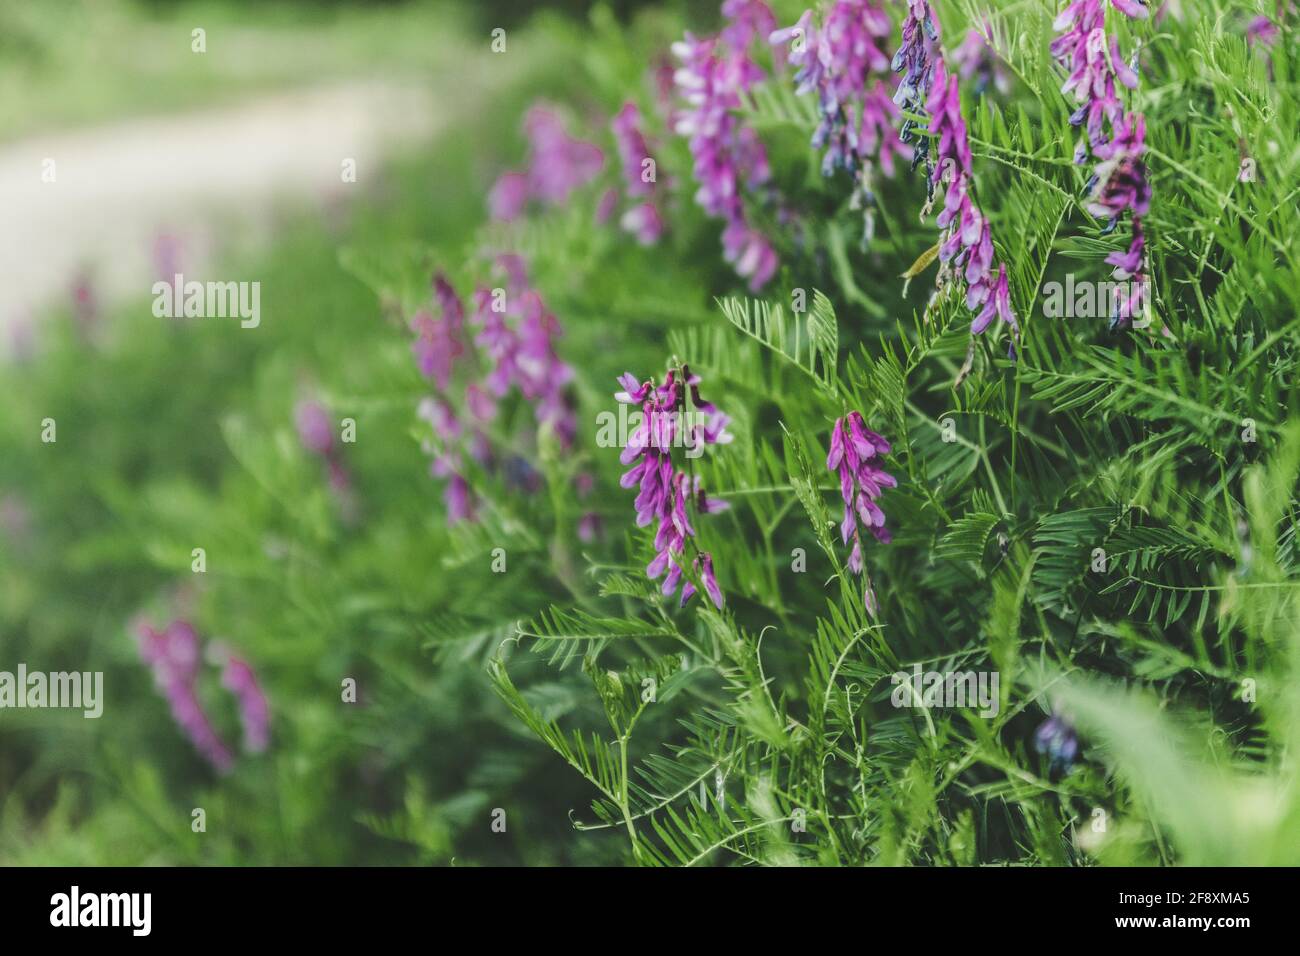 Lathyrus palustris or marsh pea with blurred background Stock Photo